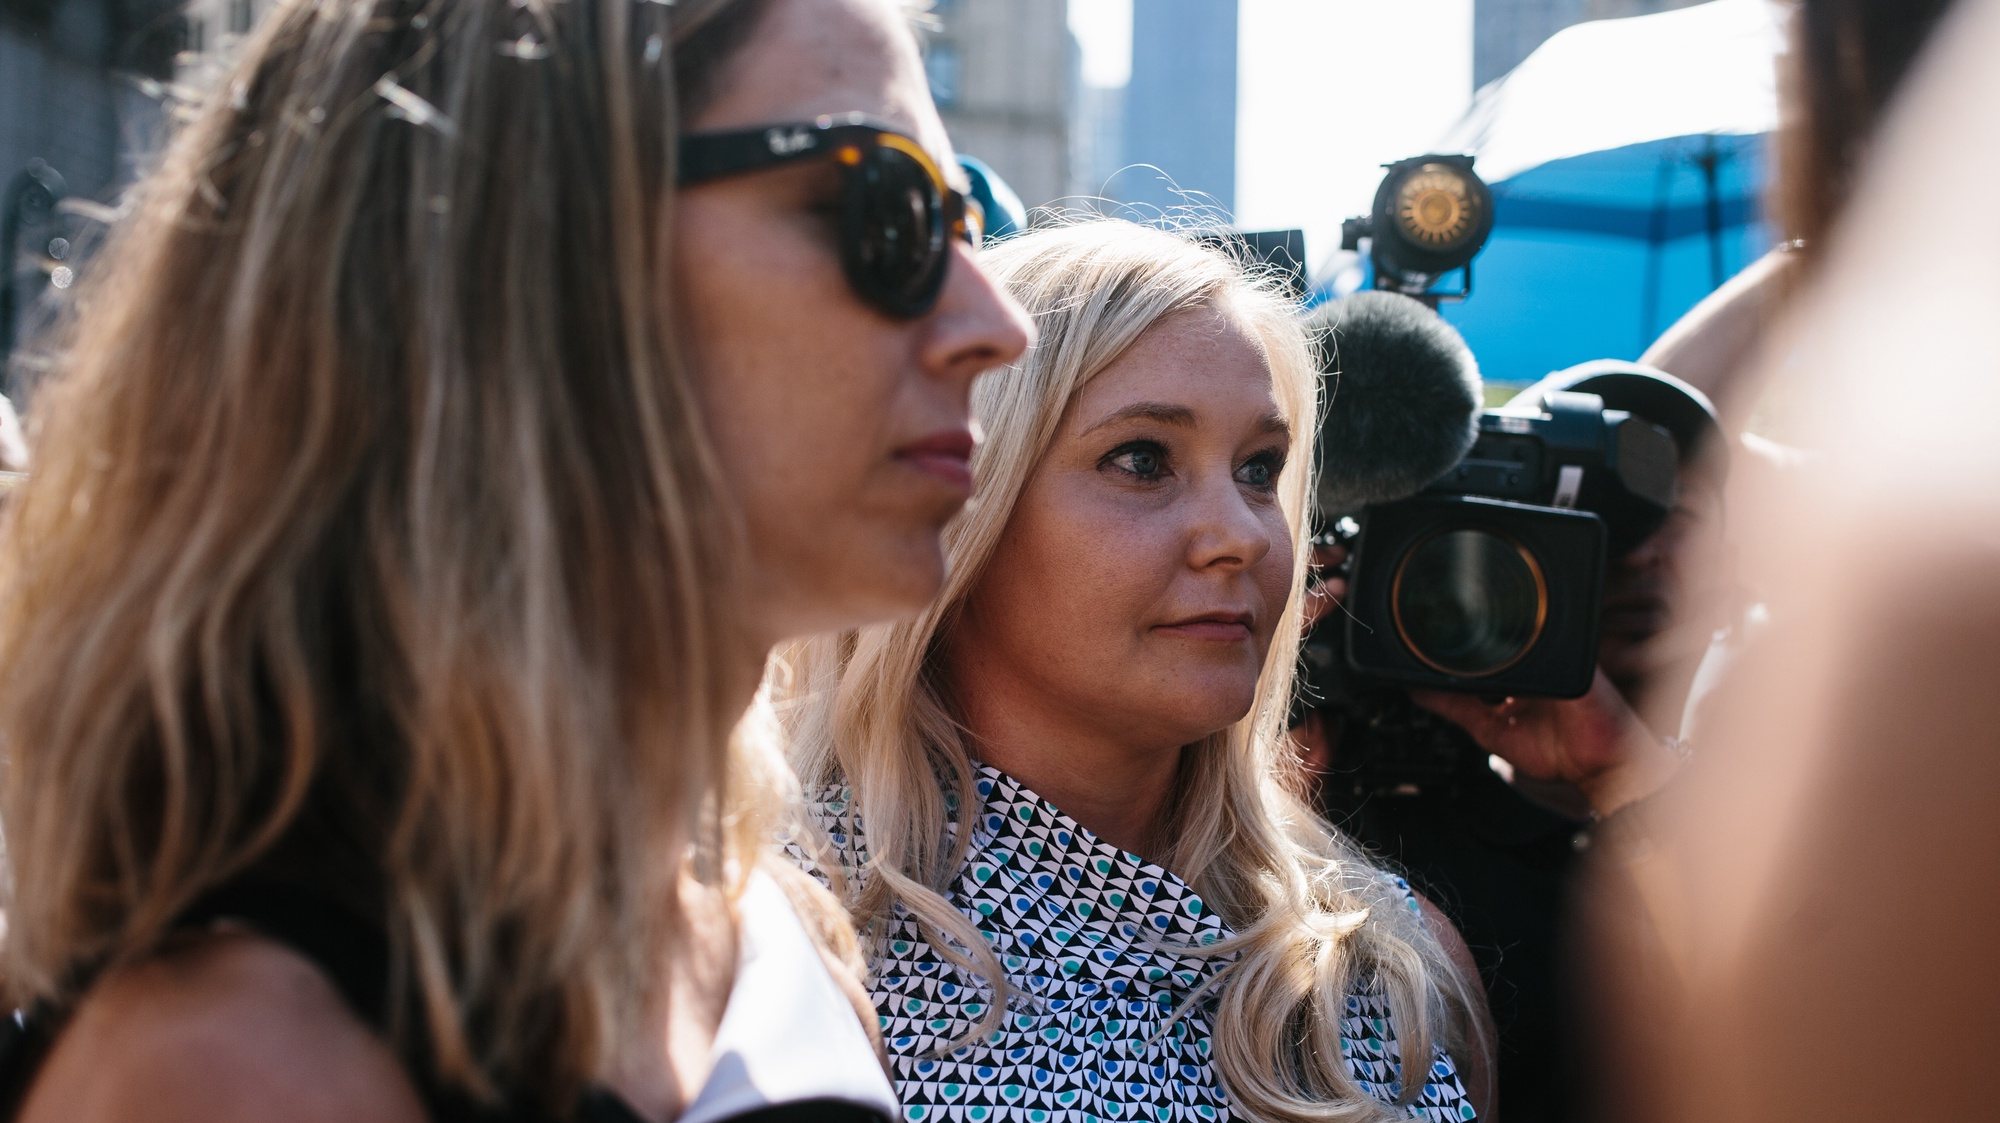 epa09407695 (FILE) - Some of deceased financier Jeffrey Epstein&#039;s alleged victims, including Virginia Roberts Giuffre (C) exit the United States Federal Courthouse in New York, New York, USA, 27 August 2019 (Reissued 09 August 2021). Virginia Roberts Giuffre filed a civil complaint in Manhattan&#039;s US District Court against Prince Andrew of Britain, accusing him of sexually abusing her when she was younger than 18 years old.  EPA/ALBA VIGARAY *** Local Caption *** 55421856